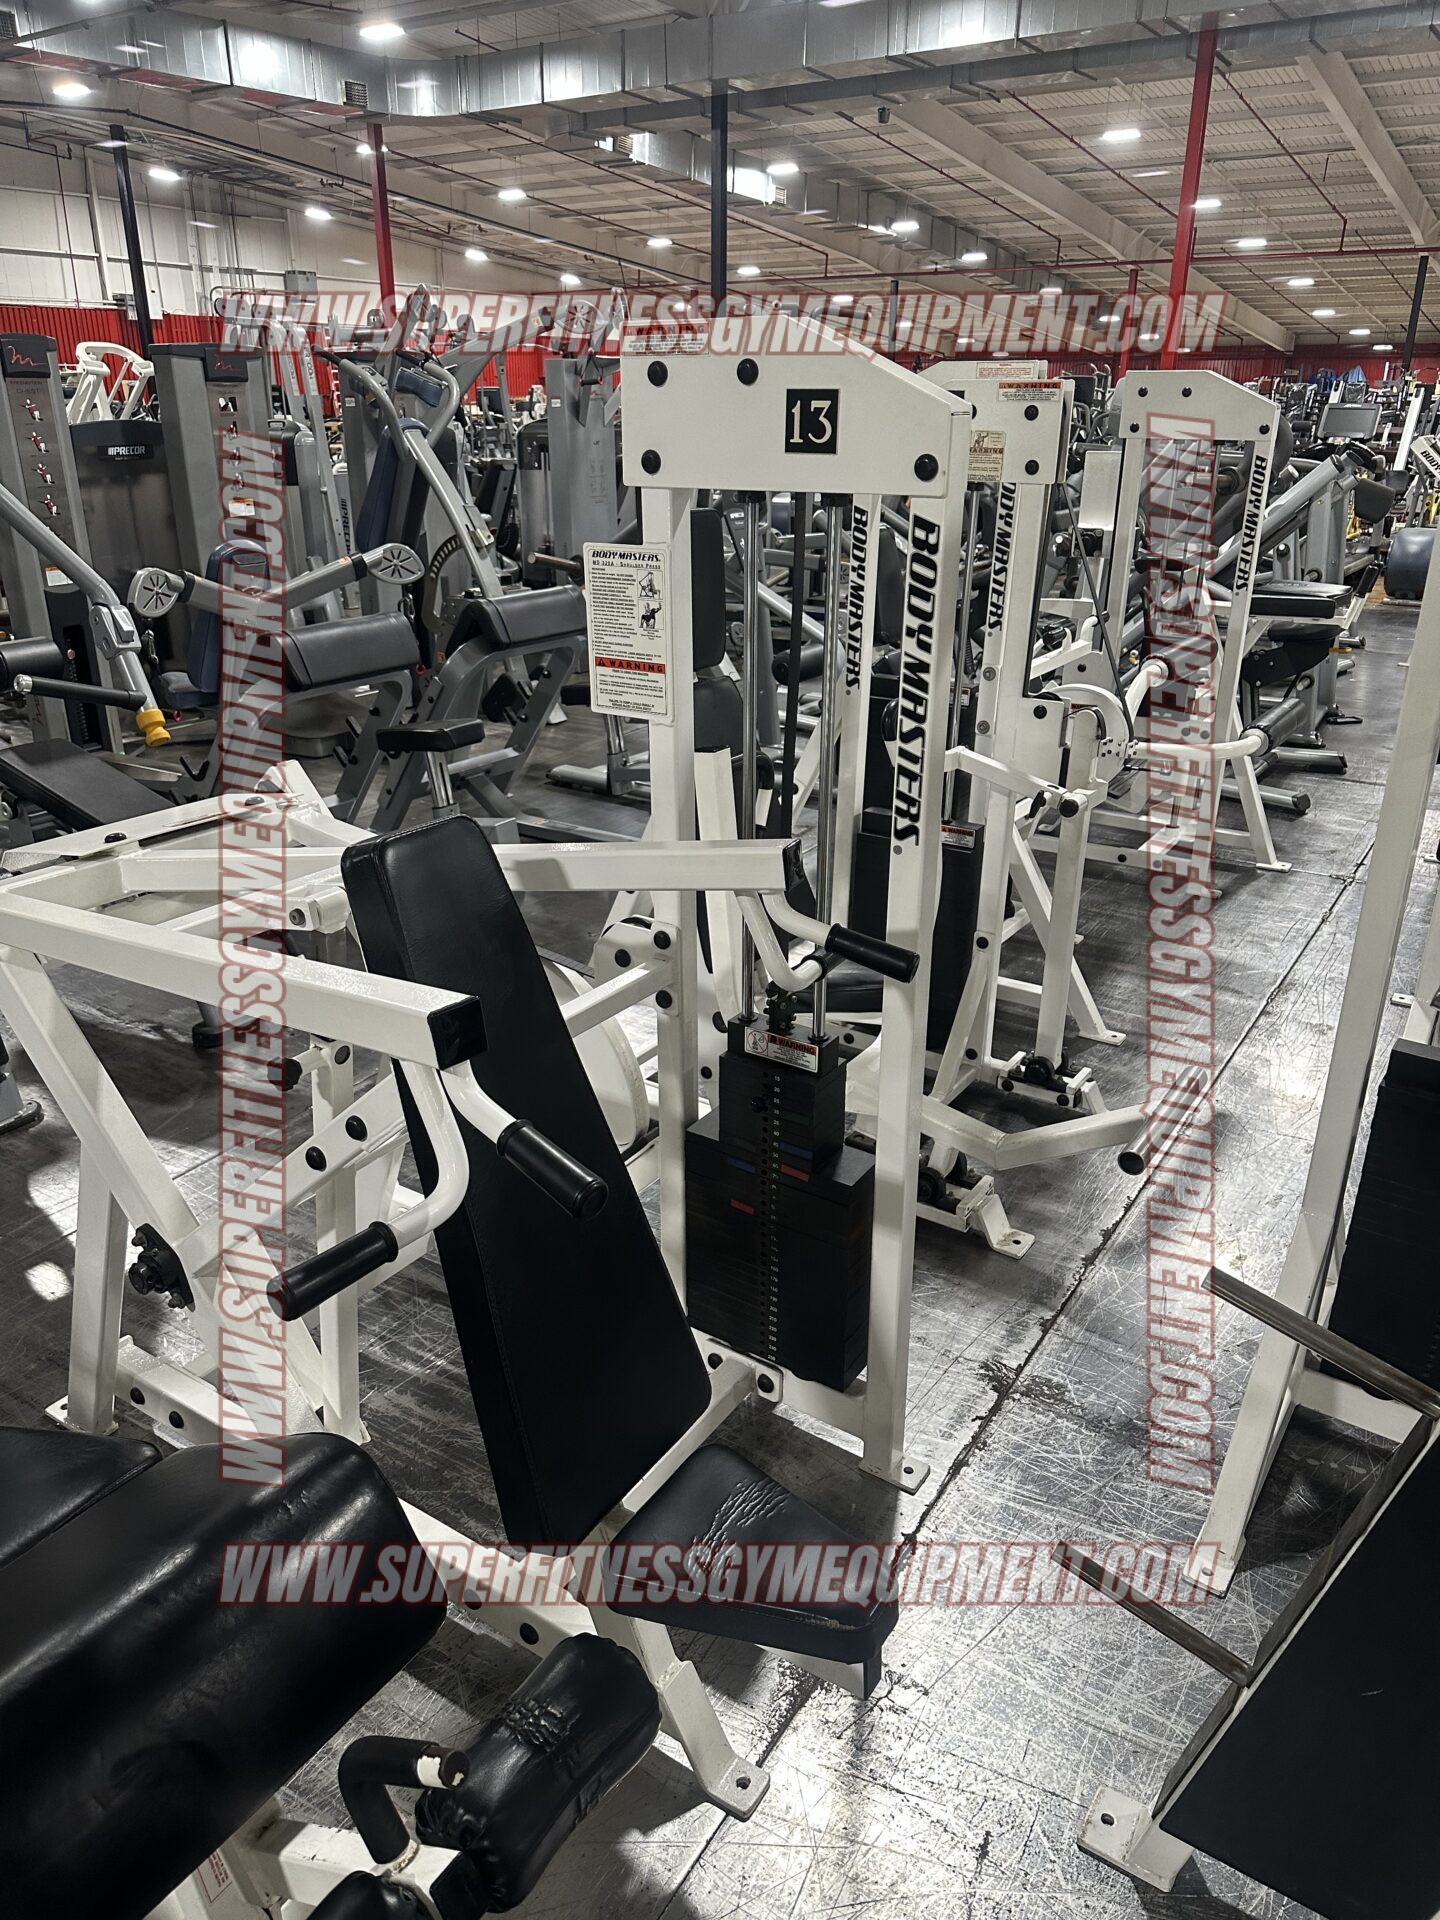 Complete BodyMasters Complete Gym Package - Superfitness Gym Equipment